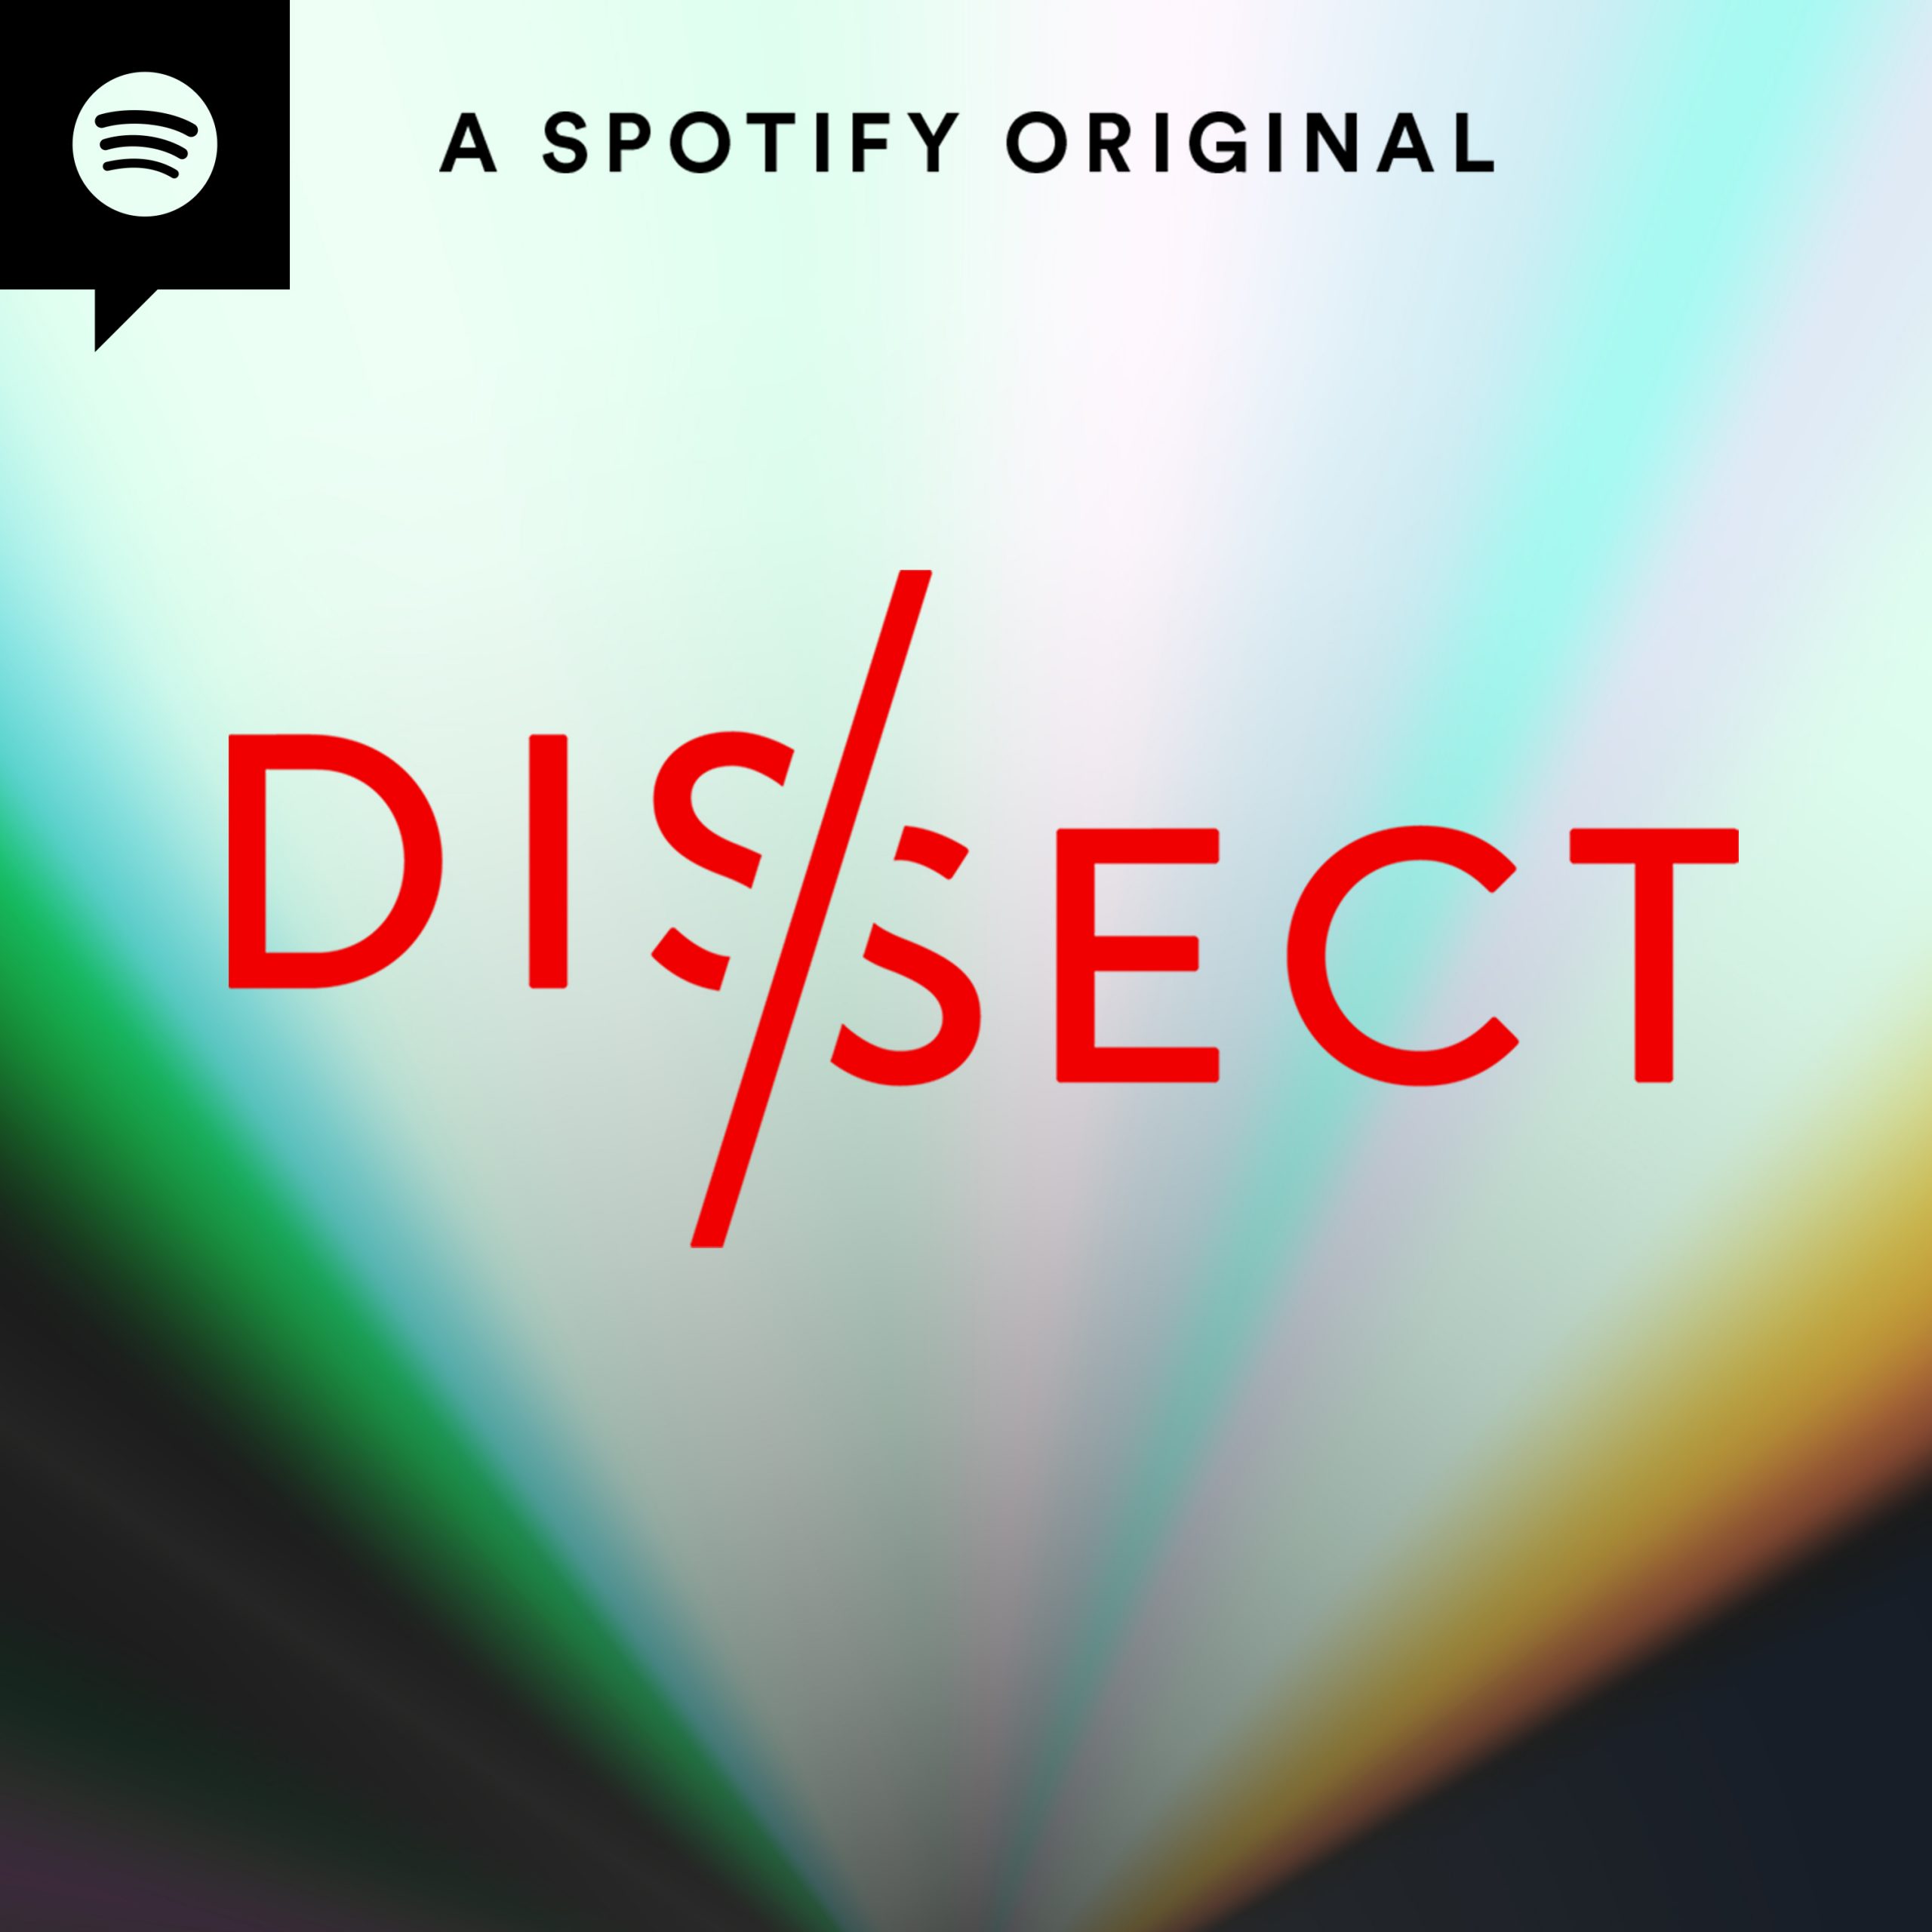 The ‘Dissect’ Podcast Tackles ‘Yeezus’ by Kanye West for Season 8